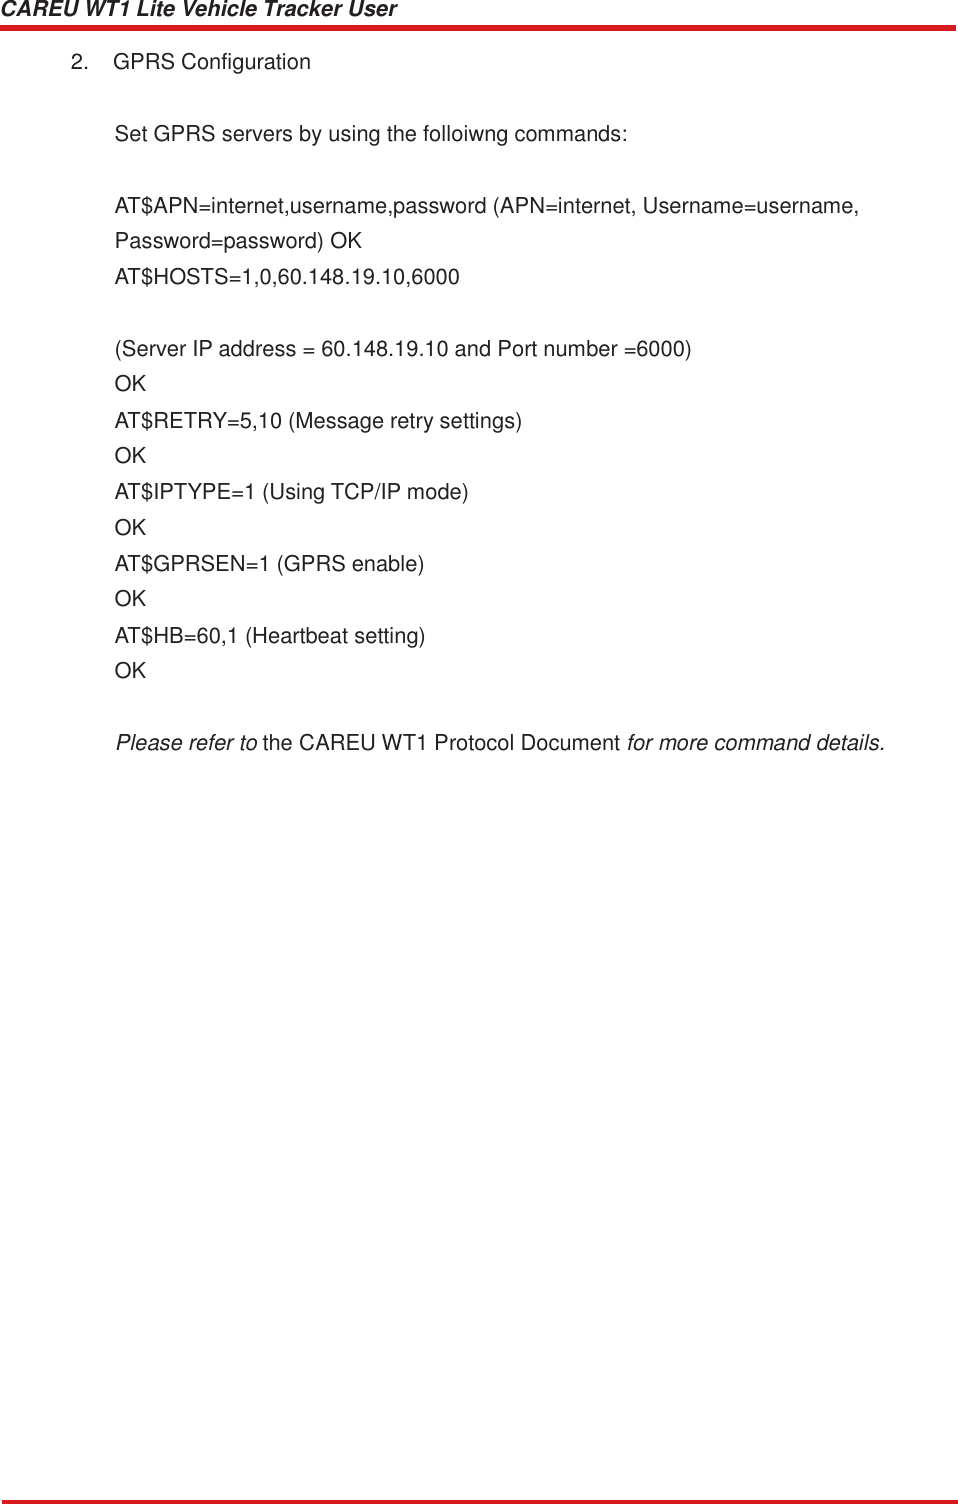 CAREU WT1 Lite Vehicle Tracker User Guide    2.  GPRS Configuration Set GPRS servers by using the folloiwng commands: AT$APN=internet,username,password (APN=internet, Username=username,  Password=password) OK AT$HOSTS=1,0,60.148.19.10,6000   (Server IP address = 60.148.19.10 and Port number =6000) OK AT$RETRY=5,10 (Message retry settings) OK AT$IPTYPE=1 (Using TCP/IP mode) OK AT$GPRSEN=1 (GPRS enable) OK AT$HB=60,1 (Heartbeat setting) OK   Please refer to the CAREU WT1 Protocol Document for more command details. 